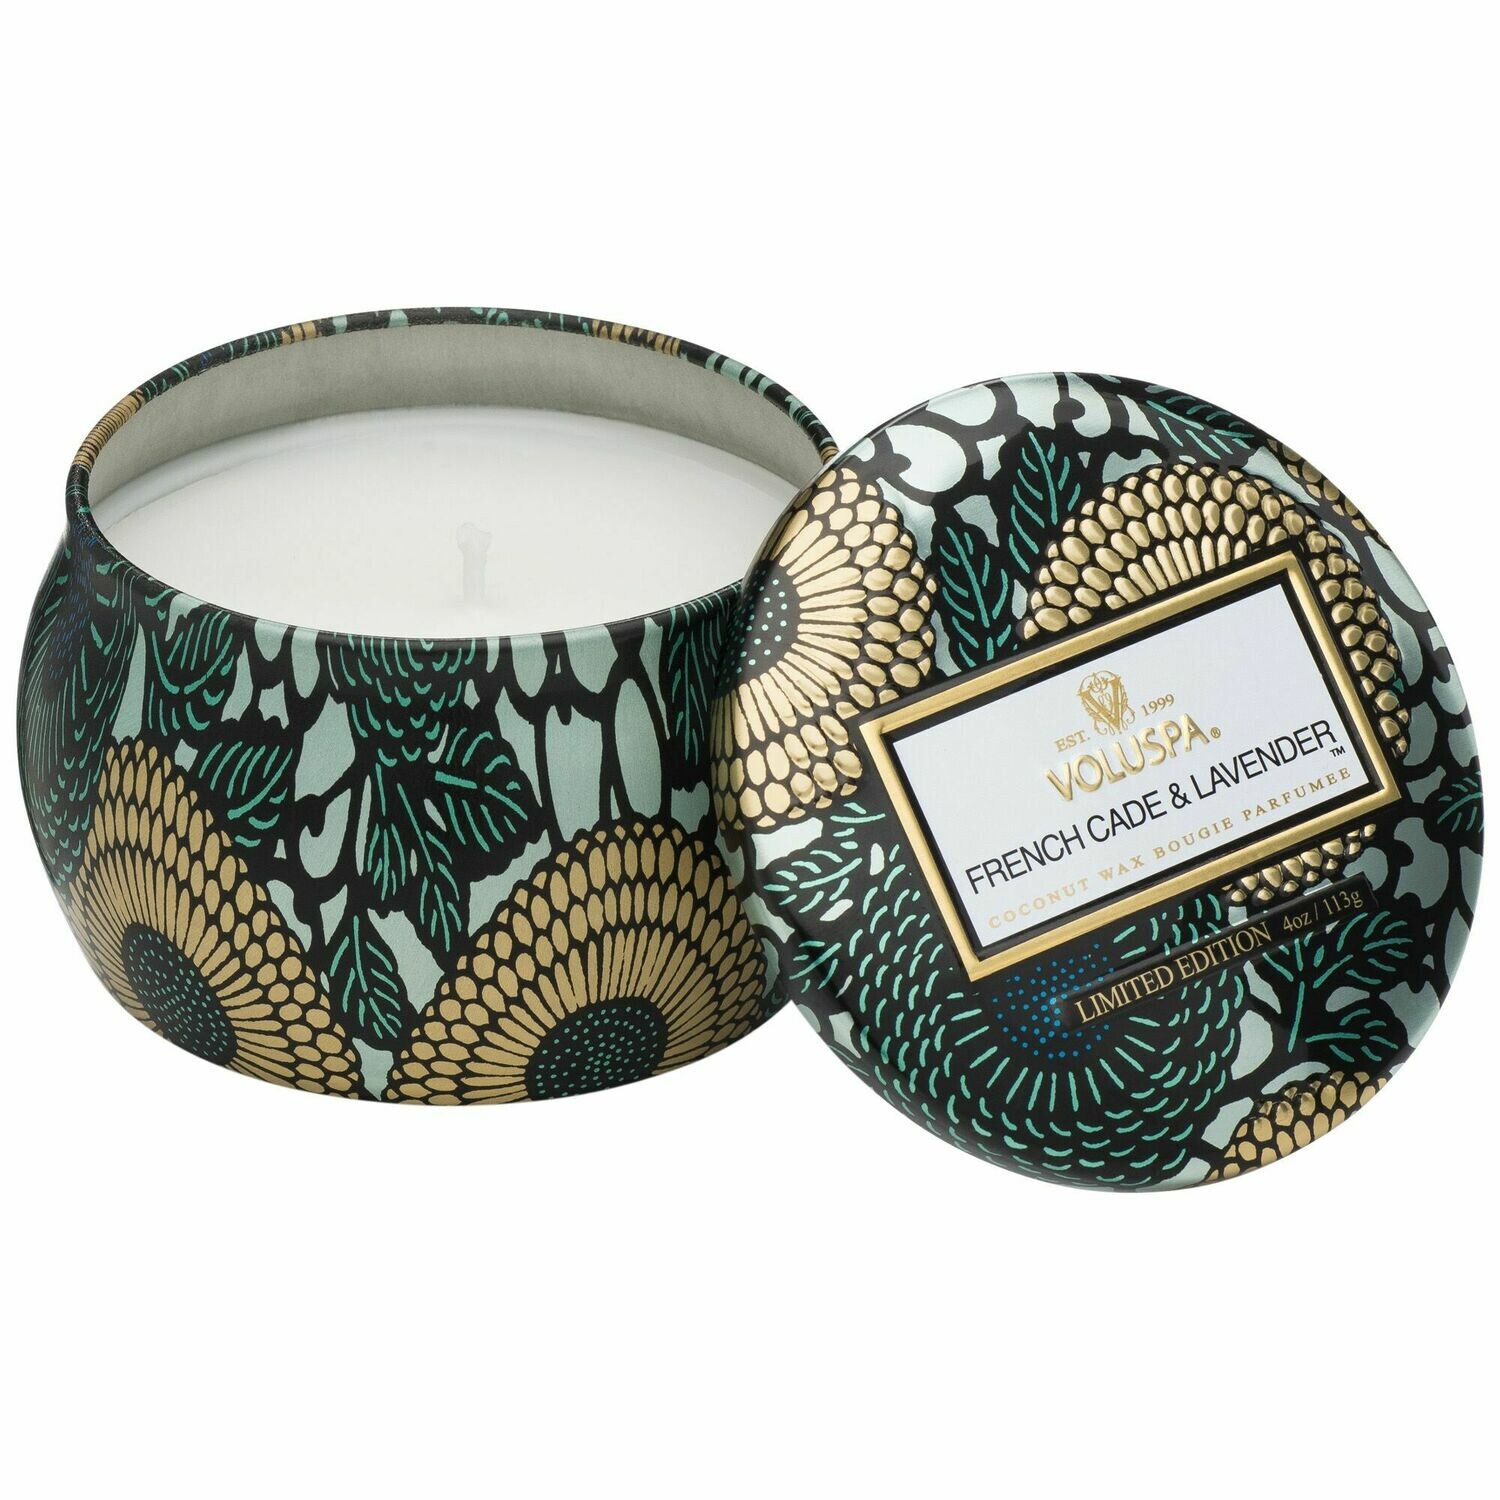 French Cade + Lavender Candle - Voluspa Petite Tin Candle